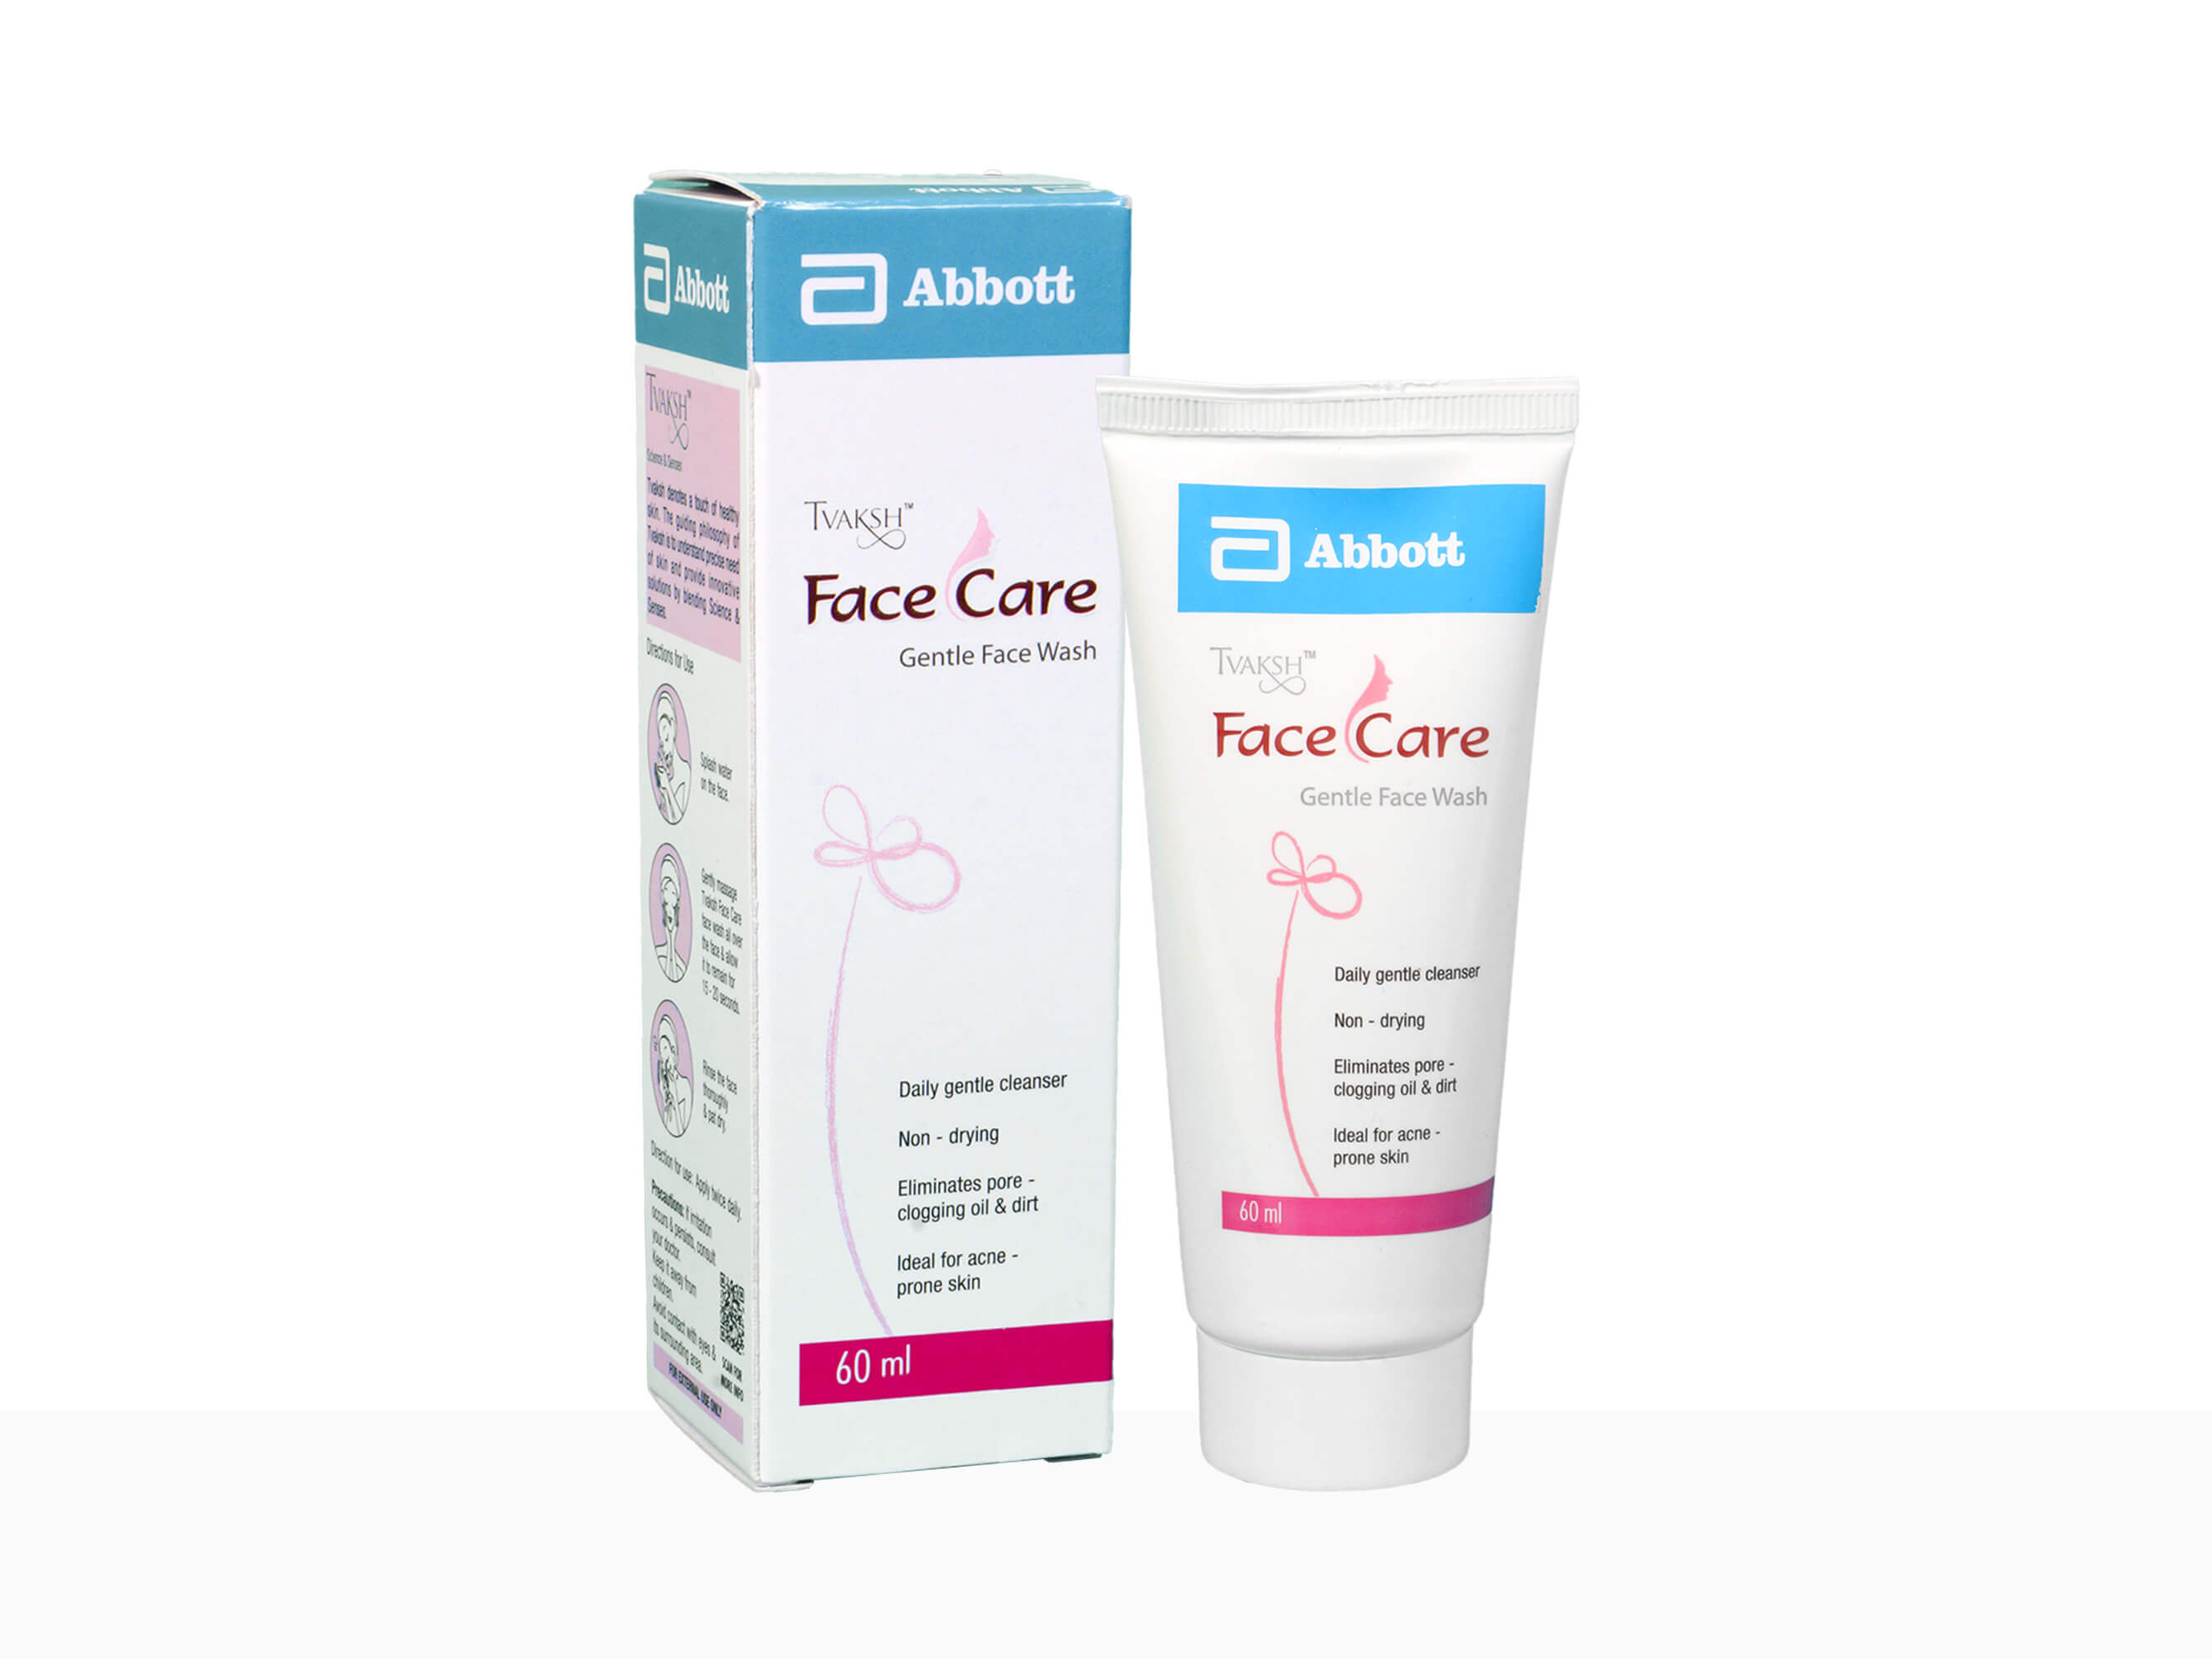 Face care gentle face wash - Clinikally